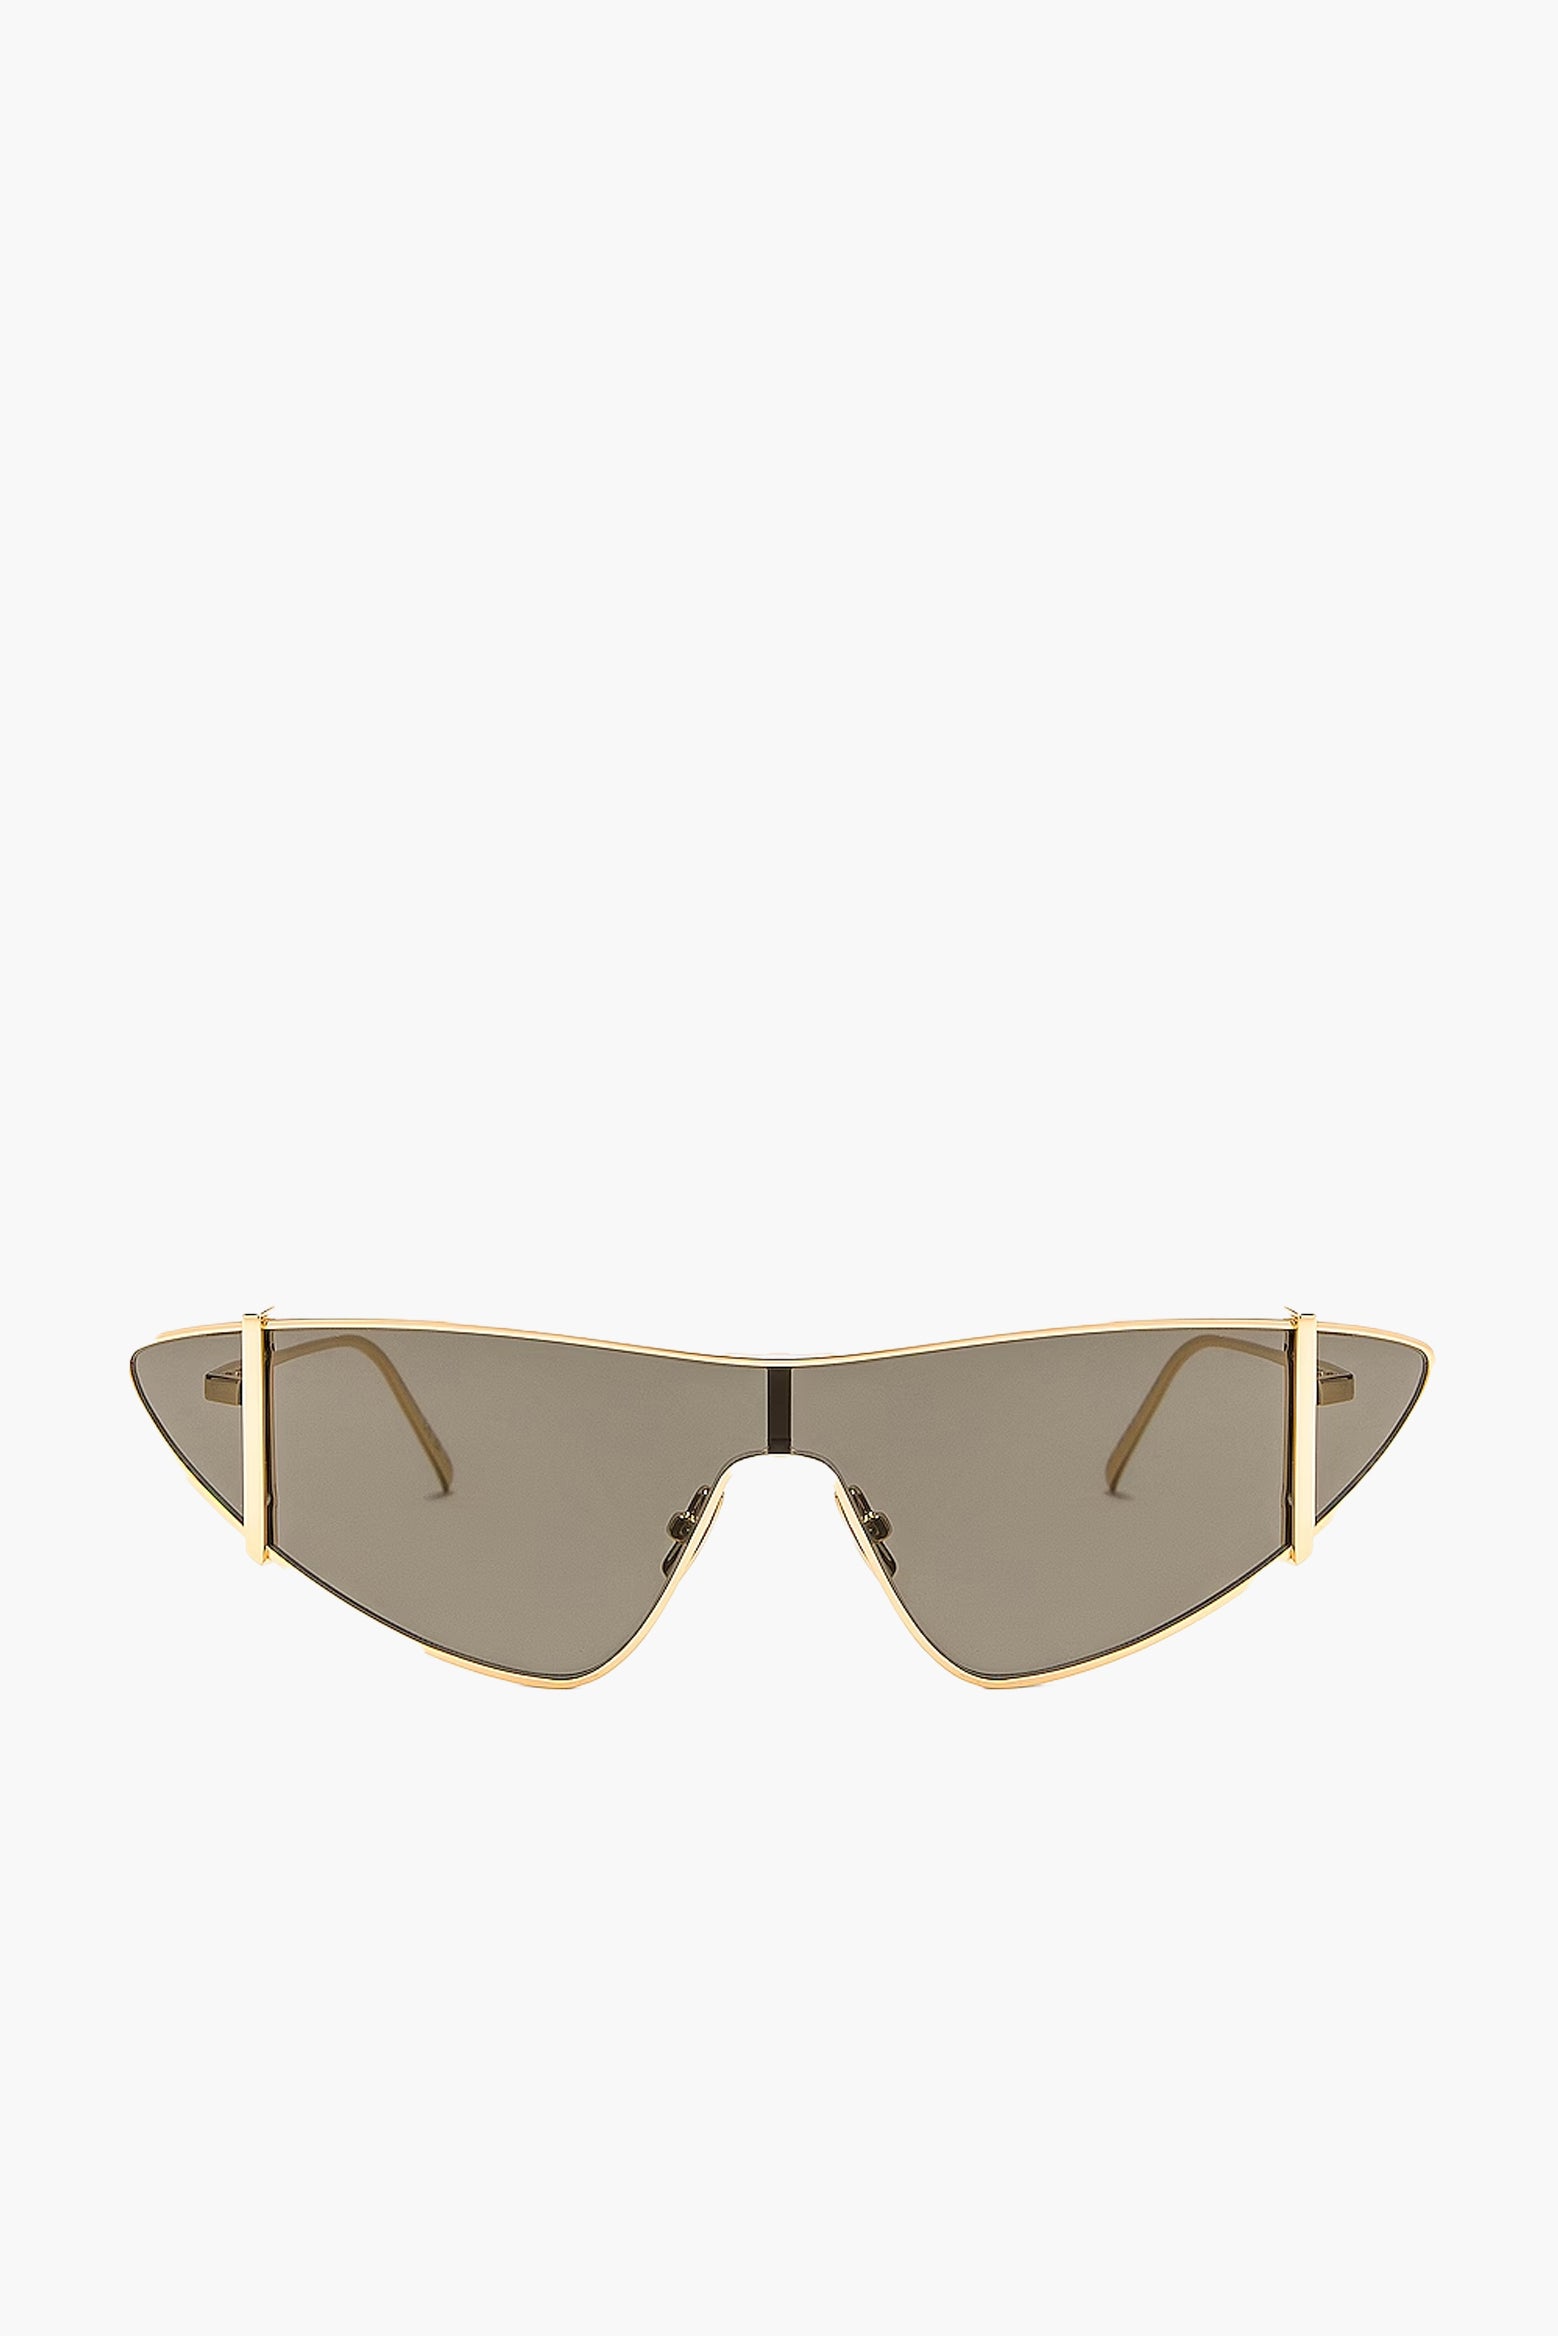 Saint Laurent Metal Cat Eye Sunglasses in Gold available at The New Trend Australia.